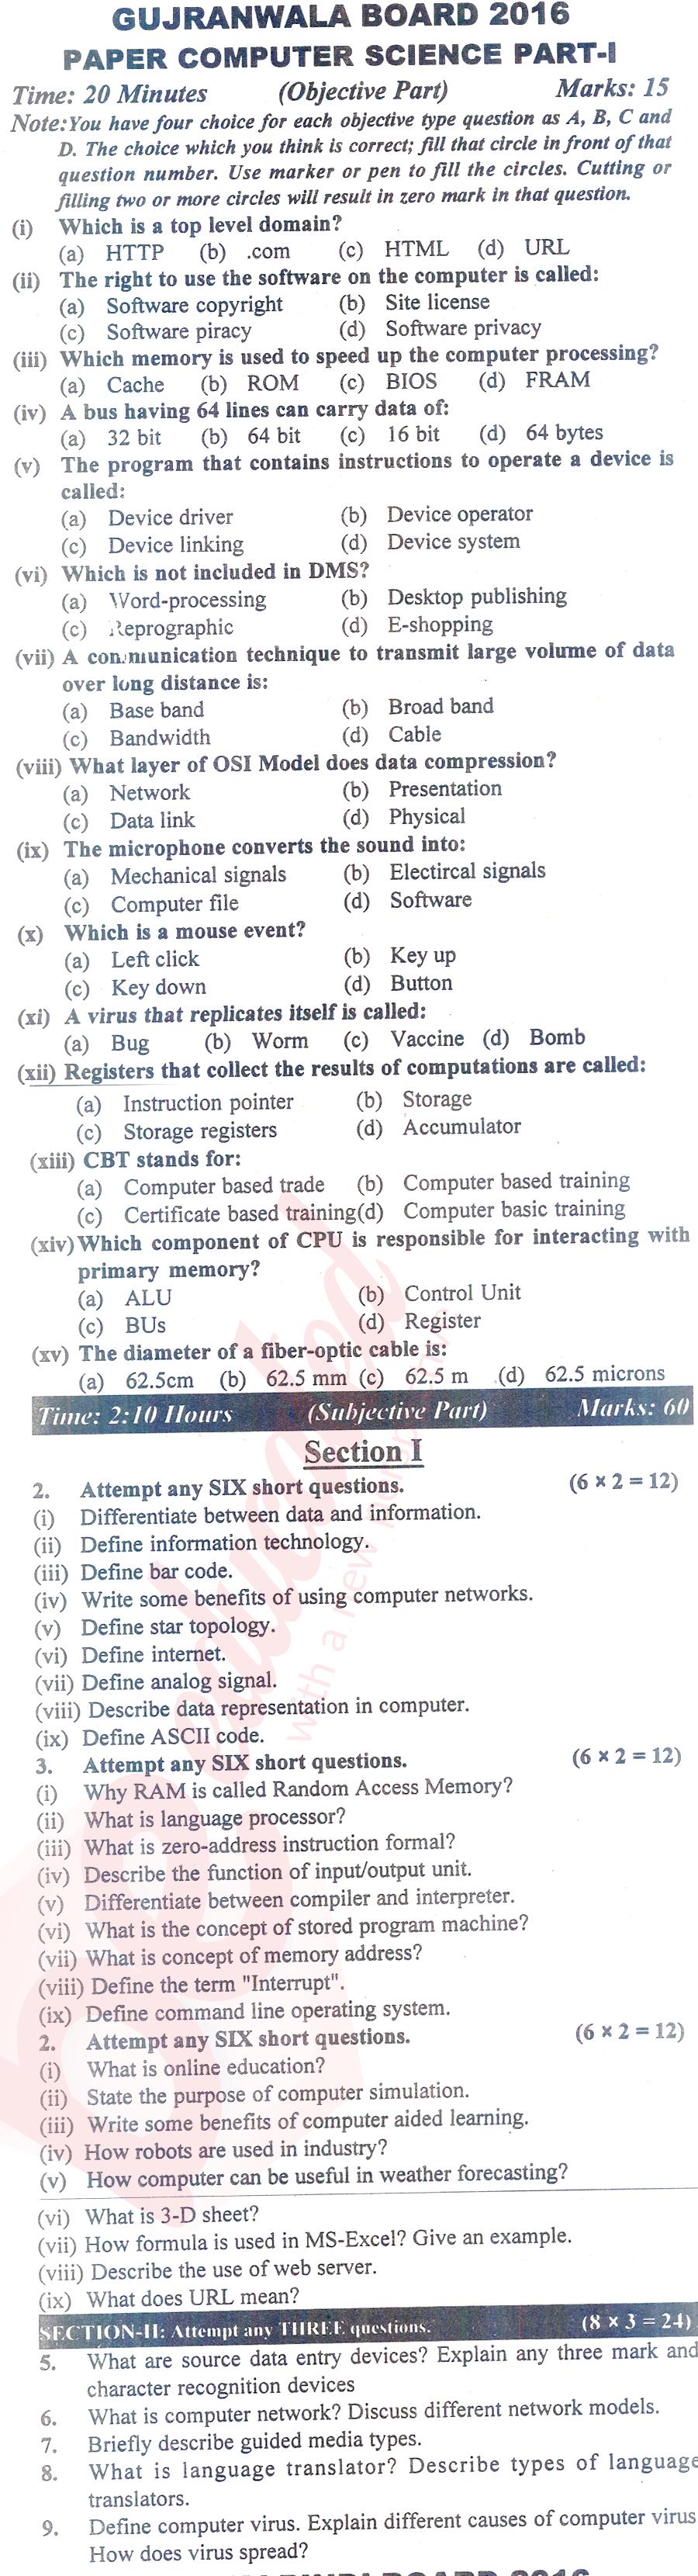 Computer Science ICS Part 1 Past Paper Group 1 BISE Gujranwala 2016